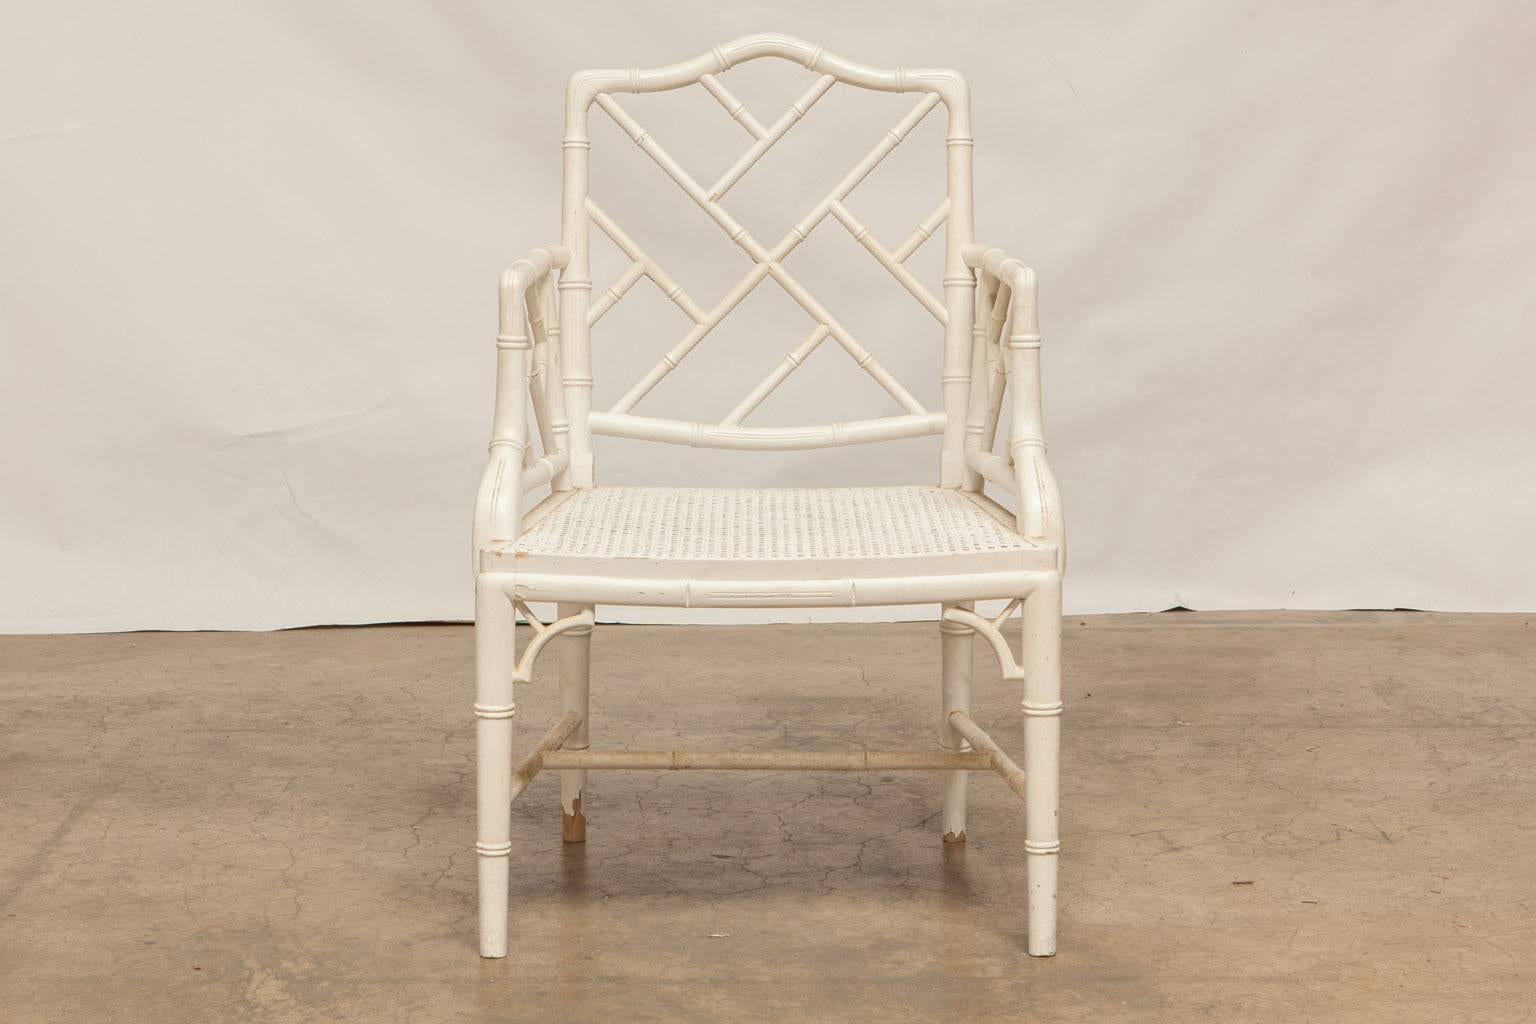 Elegant set of faux bamboo carved armchairs made in the Chinese Chippendale taste featuring a cane seat and a white lacquer finish. These armchairs have solid, tight joinery and a distressed paint finish. Made in the Classic style with open fretwork